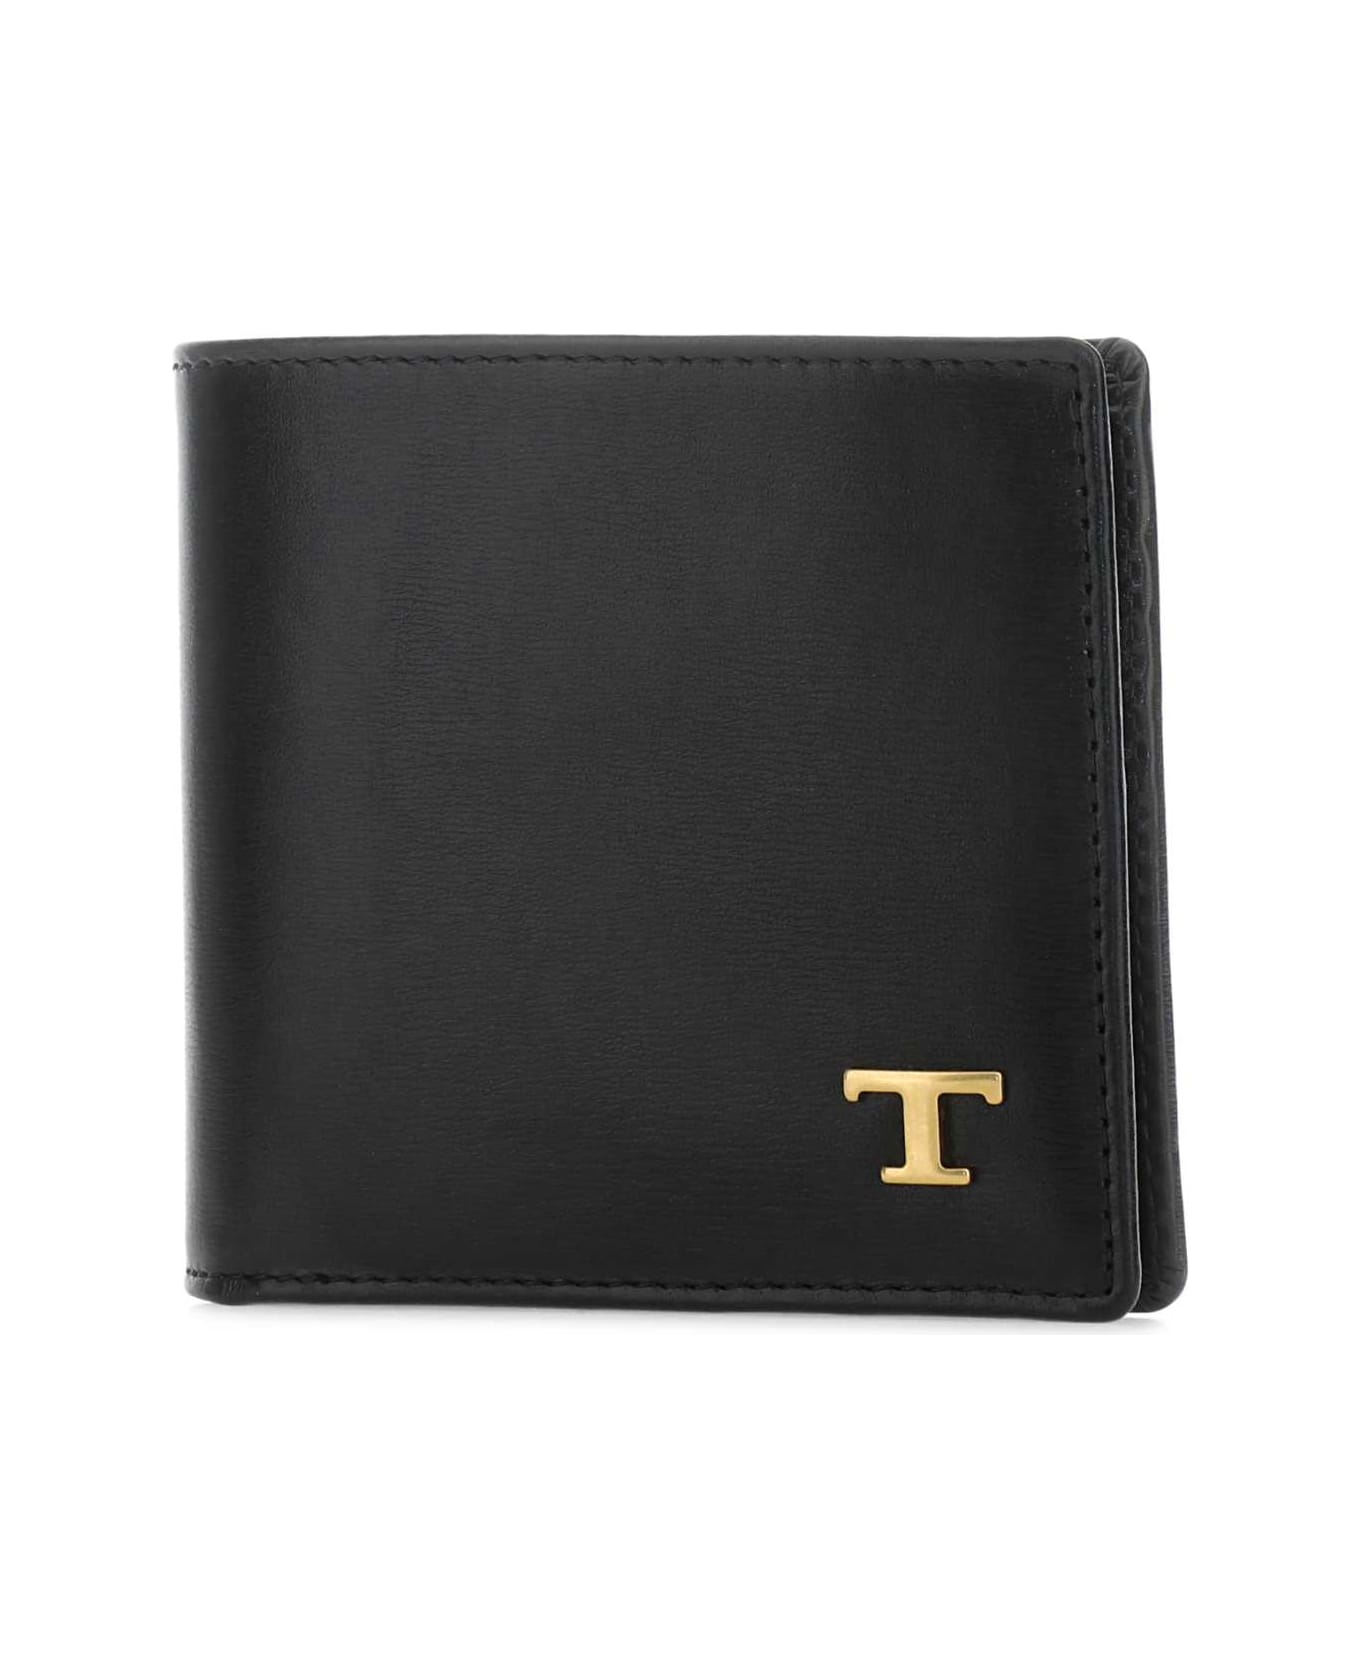 Tod's Black Leather Wallet - B999